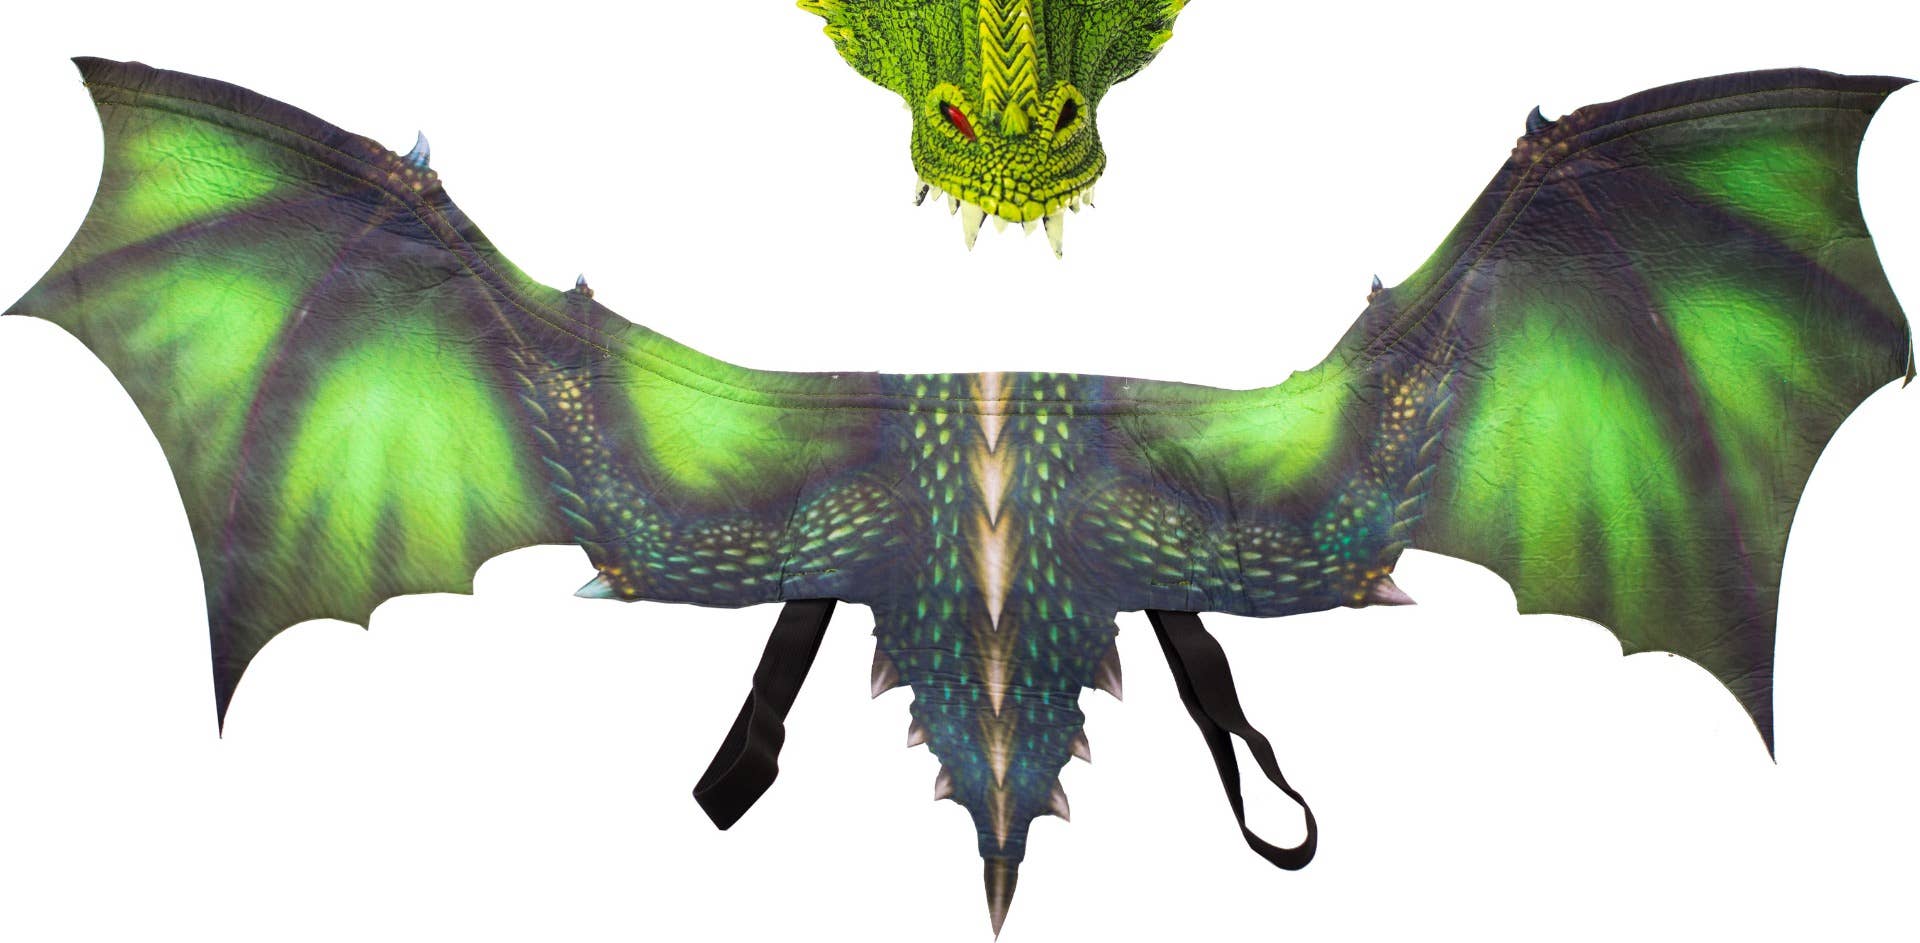 Green Dragon Kid's Halloween Foam Mask And Fabric Wings Costume Accessory Kit Close Up Wings Image